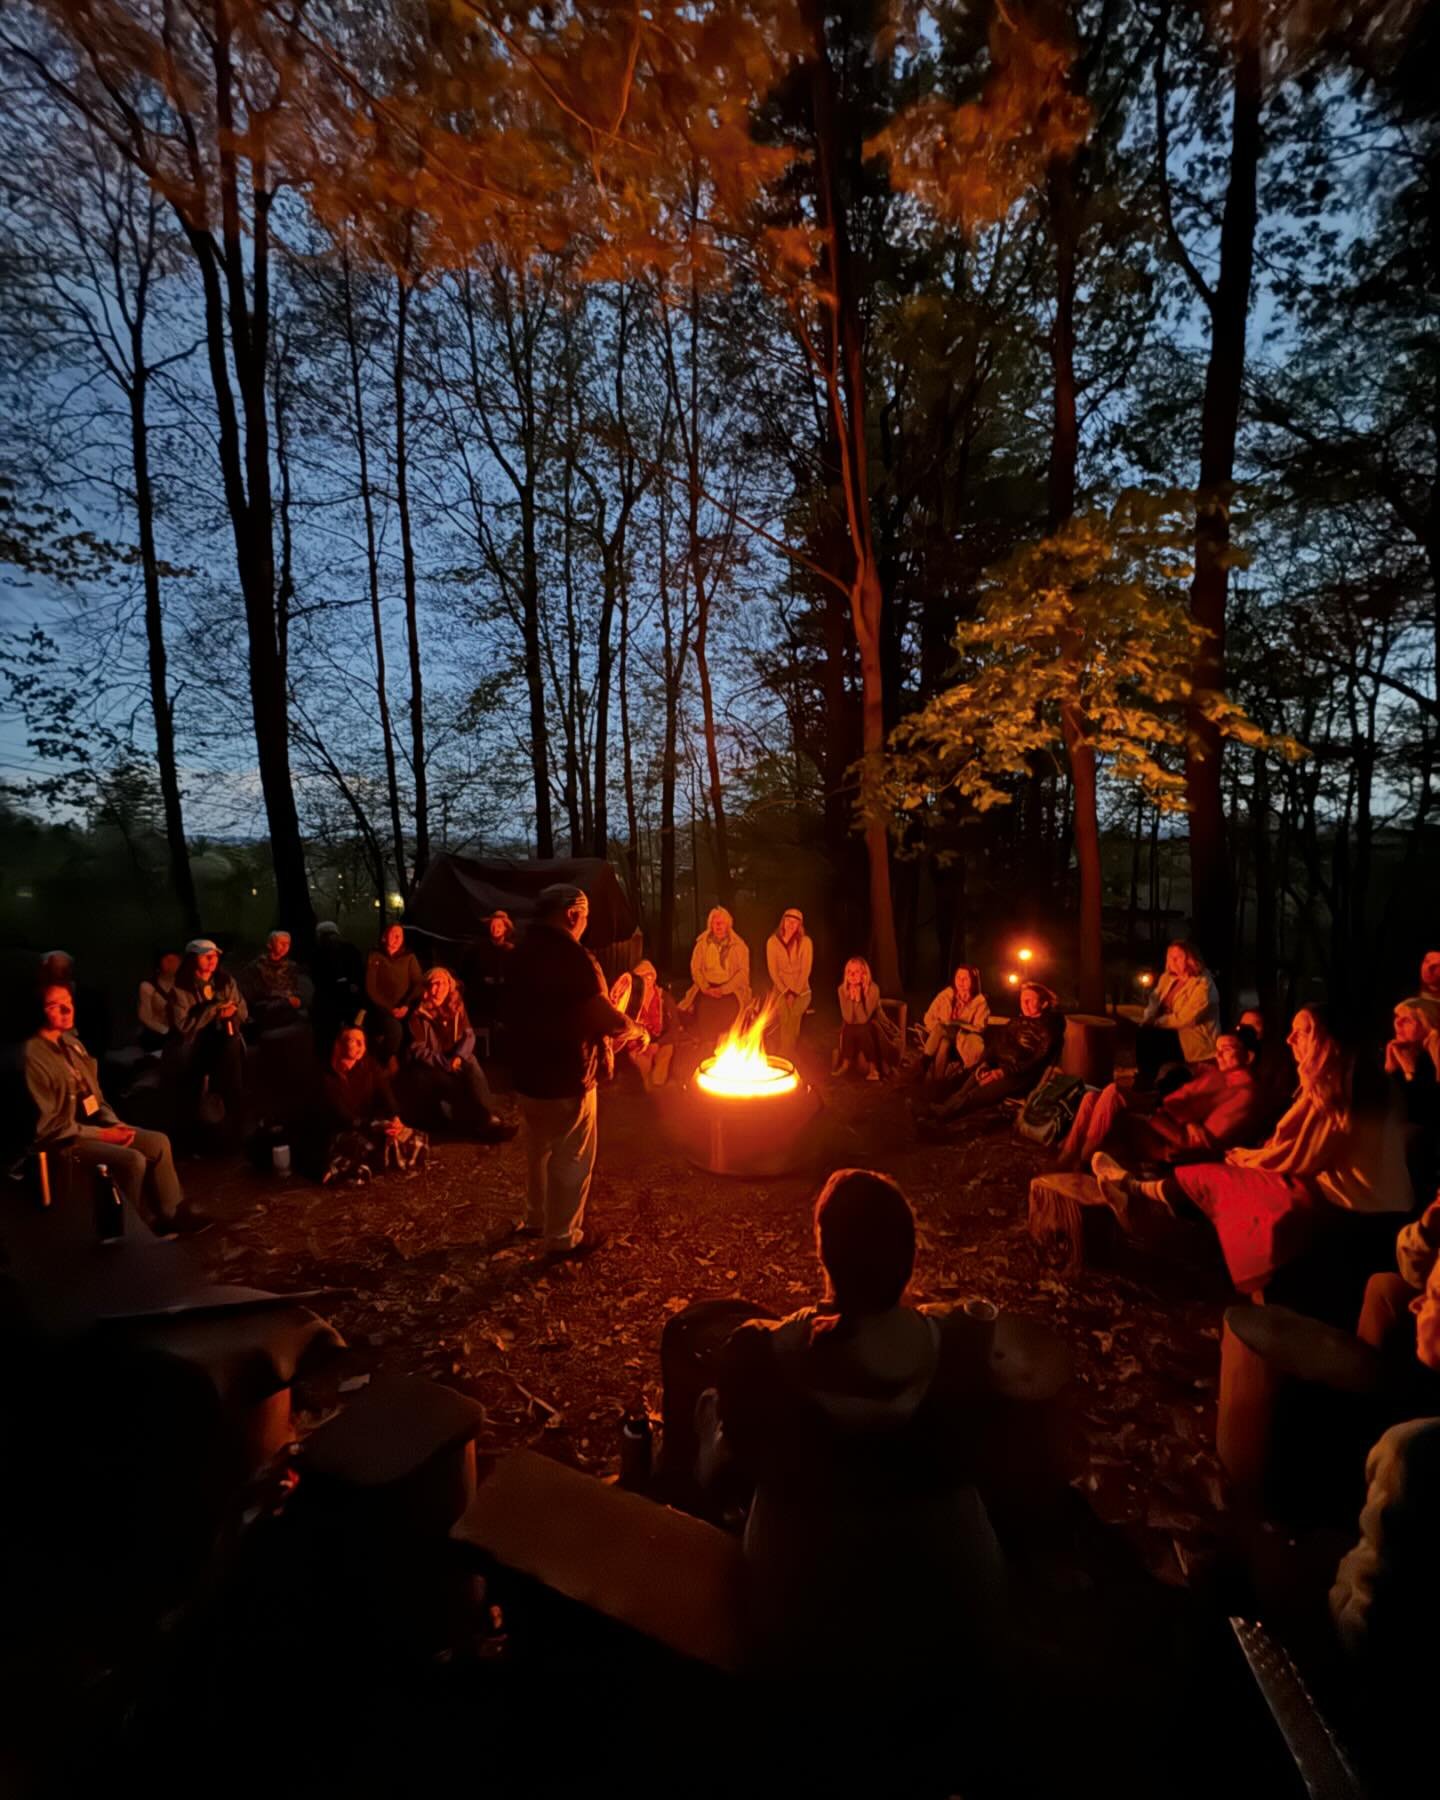 An unforgettable evening in the homelands with our dear friend and brother, @ahkoheka Shawn Stephens. Shawn shared wisdom and stories with us from his Mohican culture while the thunderclouds in the east lit up with lightning and the wind moved the tr